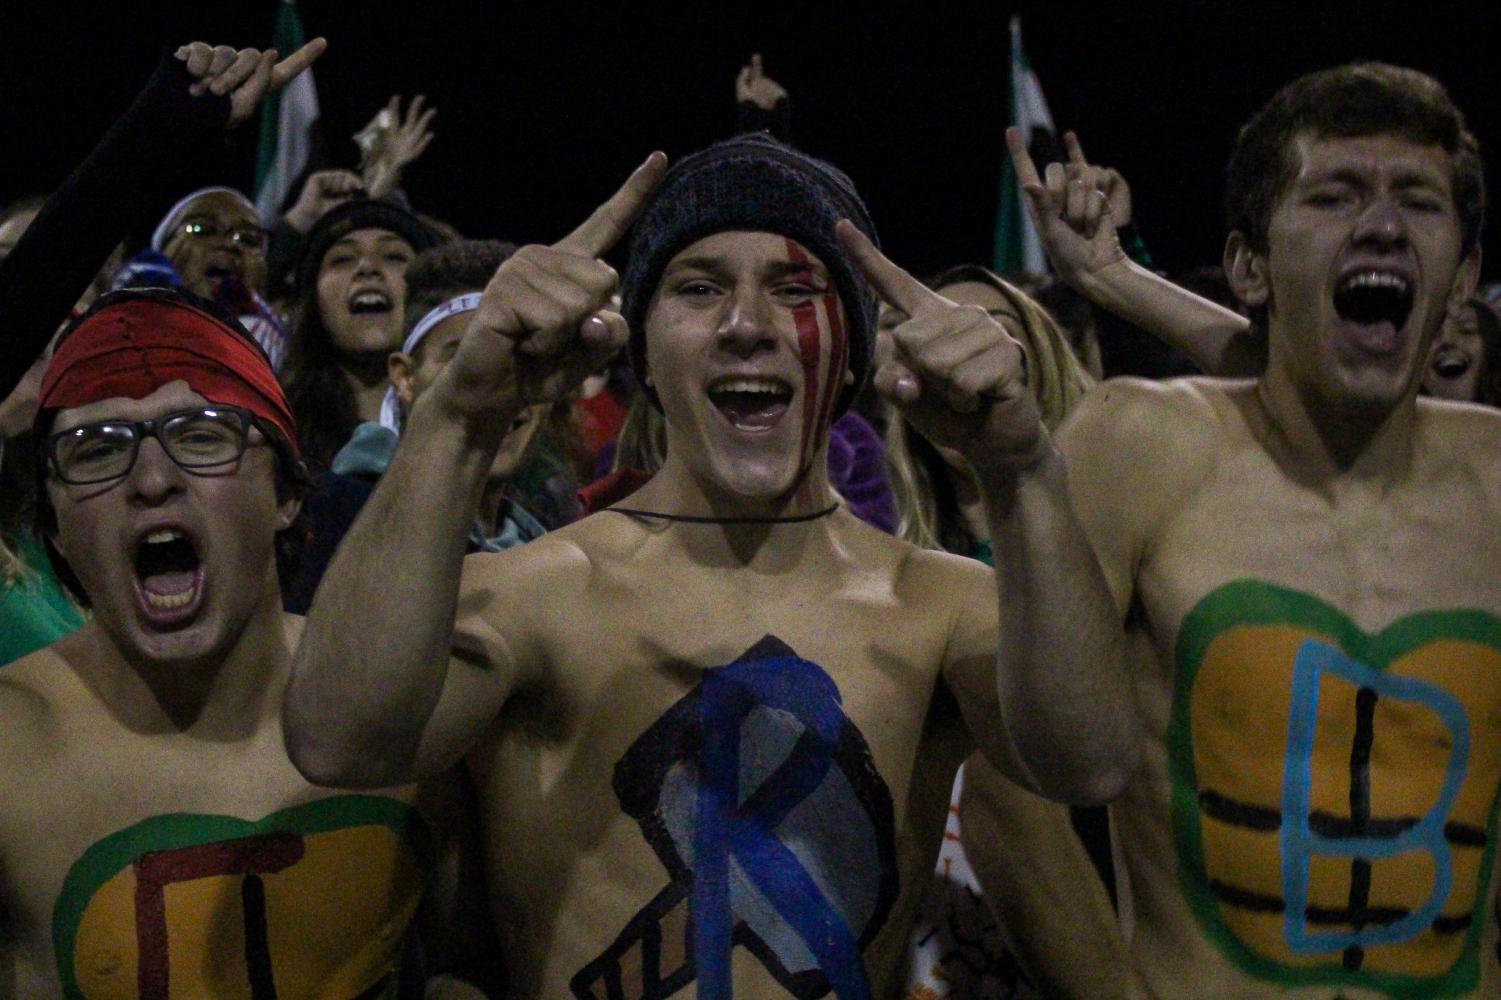 Derby+v+Campus+rivalry+game+photo+gallery+by+Regina+Waugh